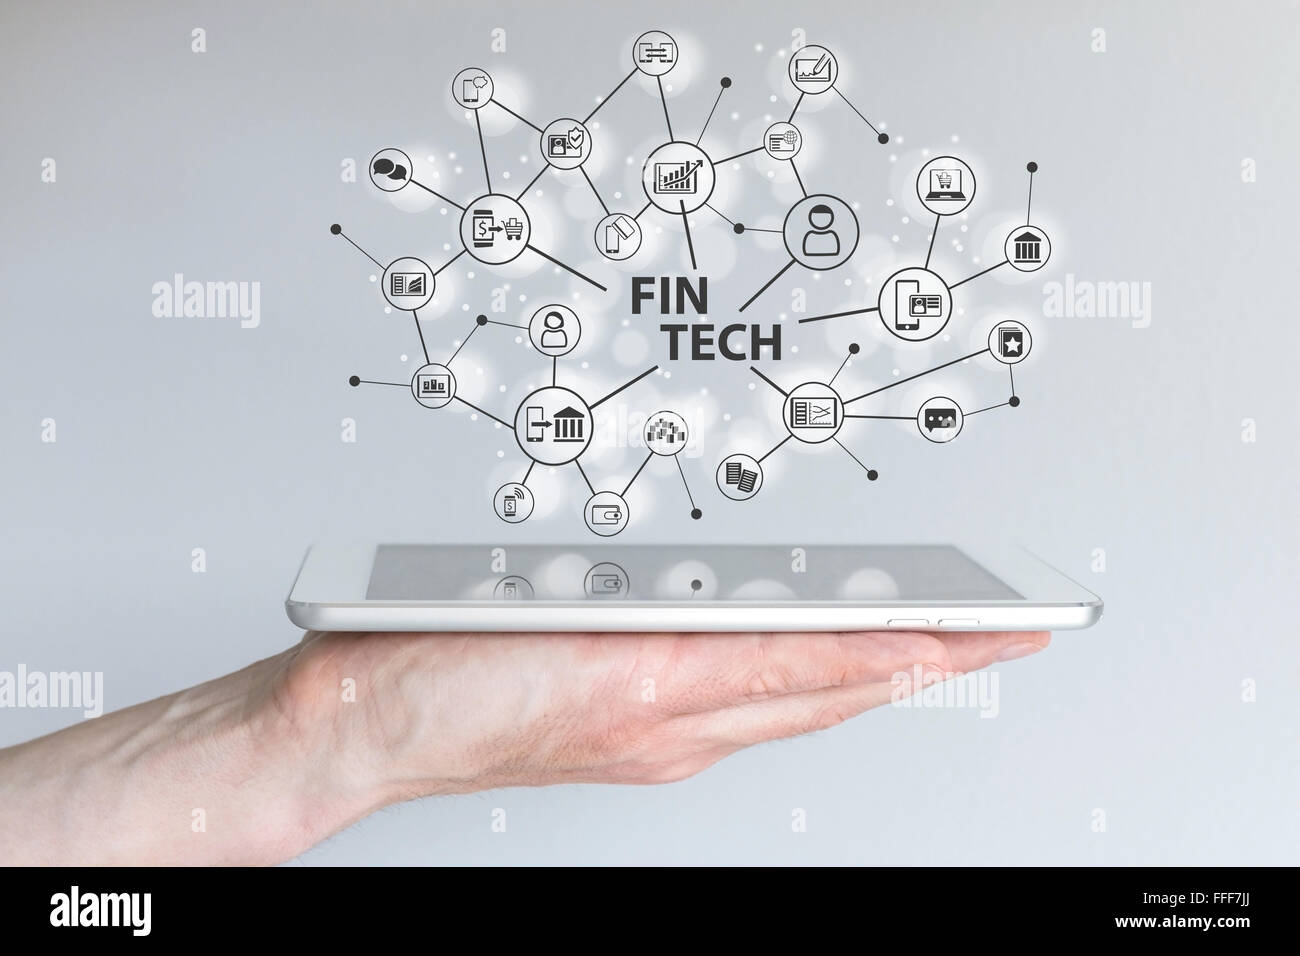 Fin Tech and mobile computing concept. Hand holding tablet Stock Photo